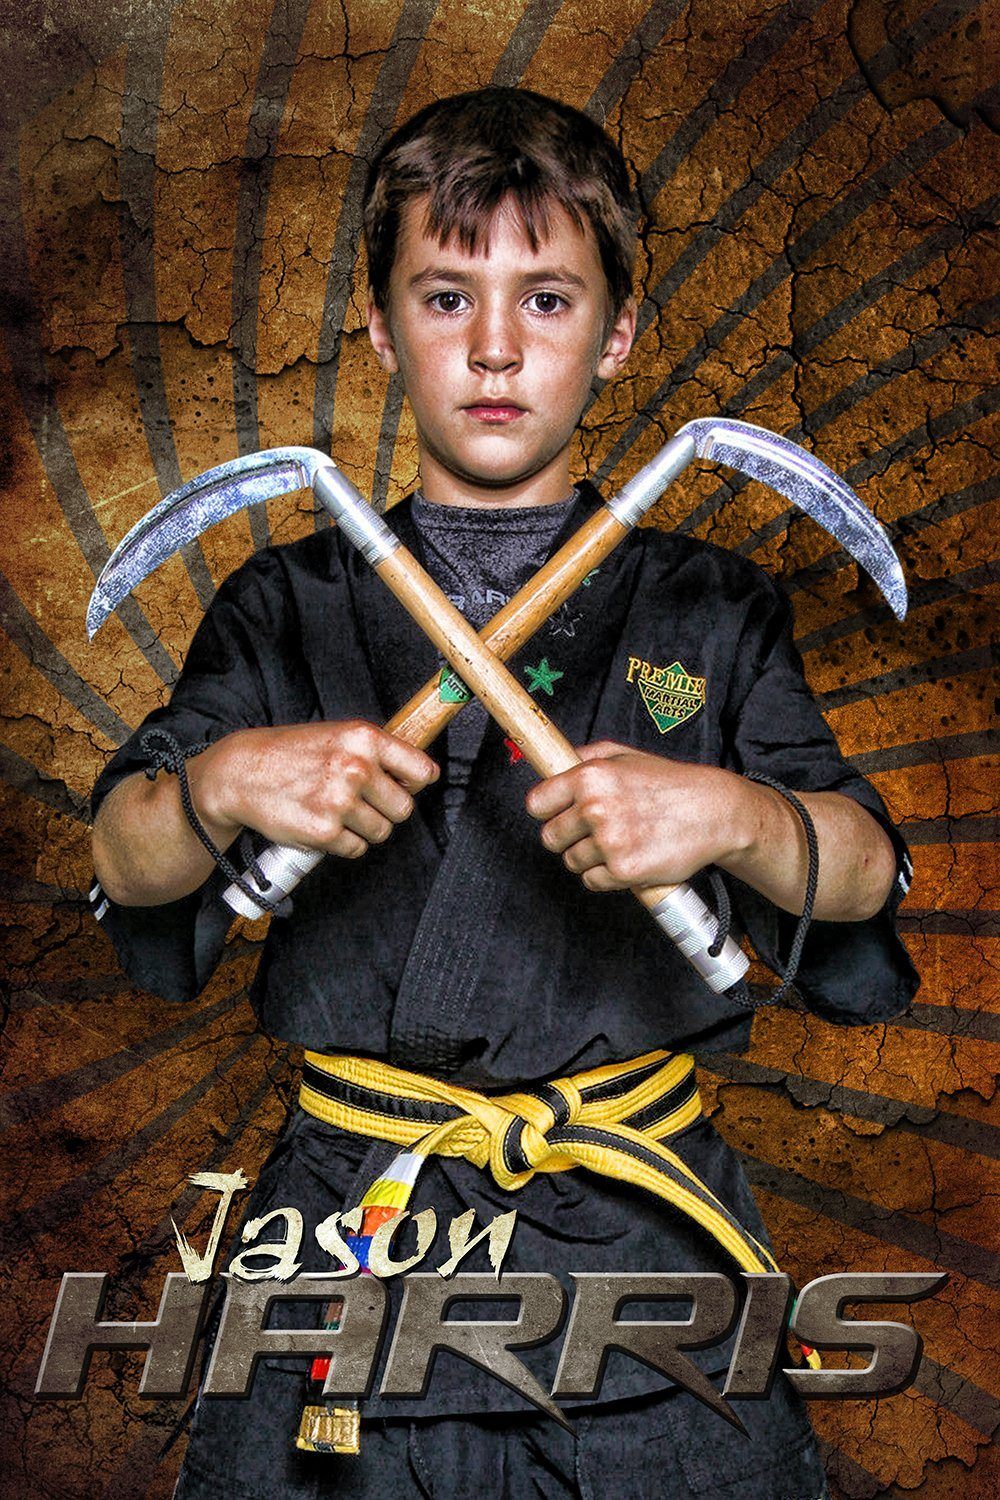 Rising Sun - Martial Arts Series - Poster/Banner V-Photoshop Template - Photo Solutions